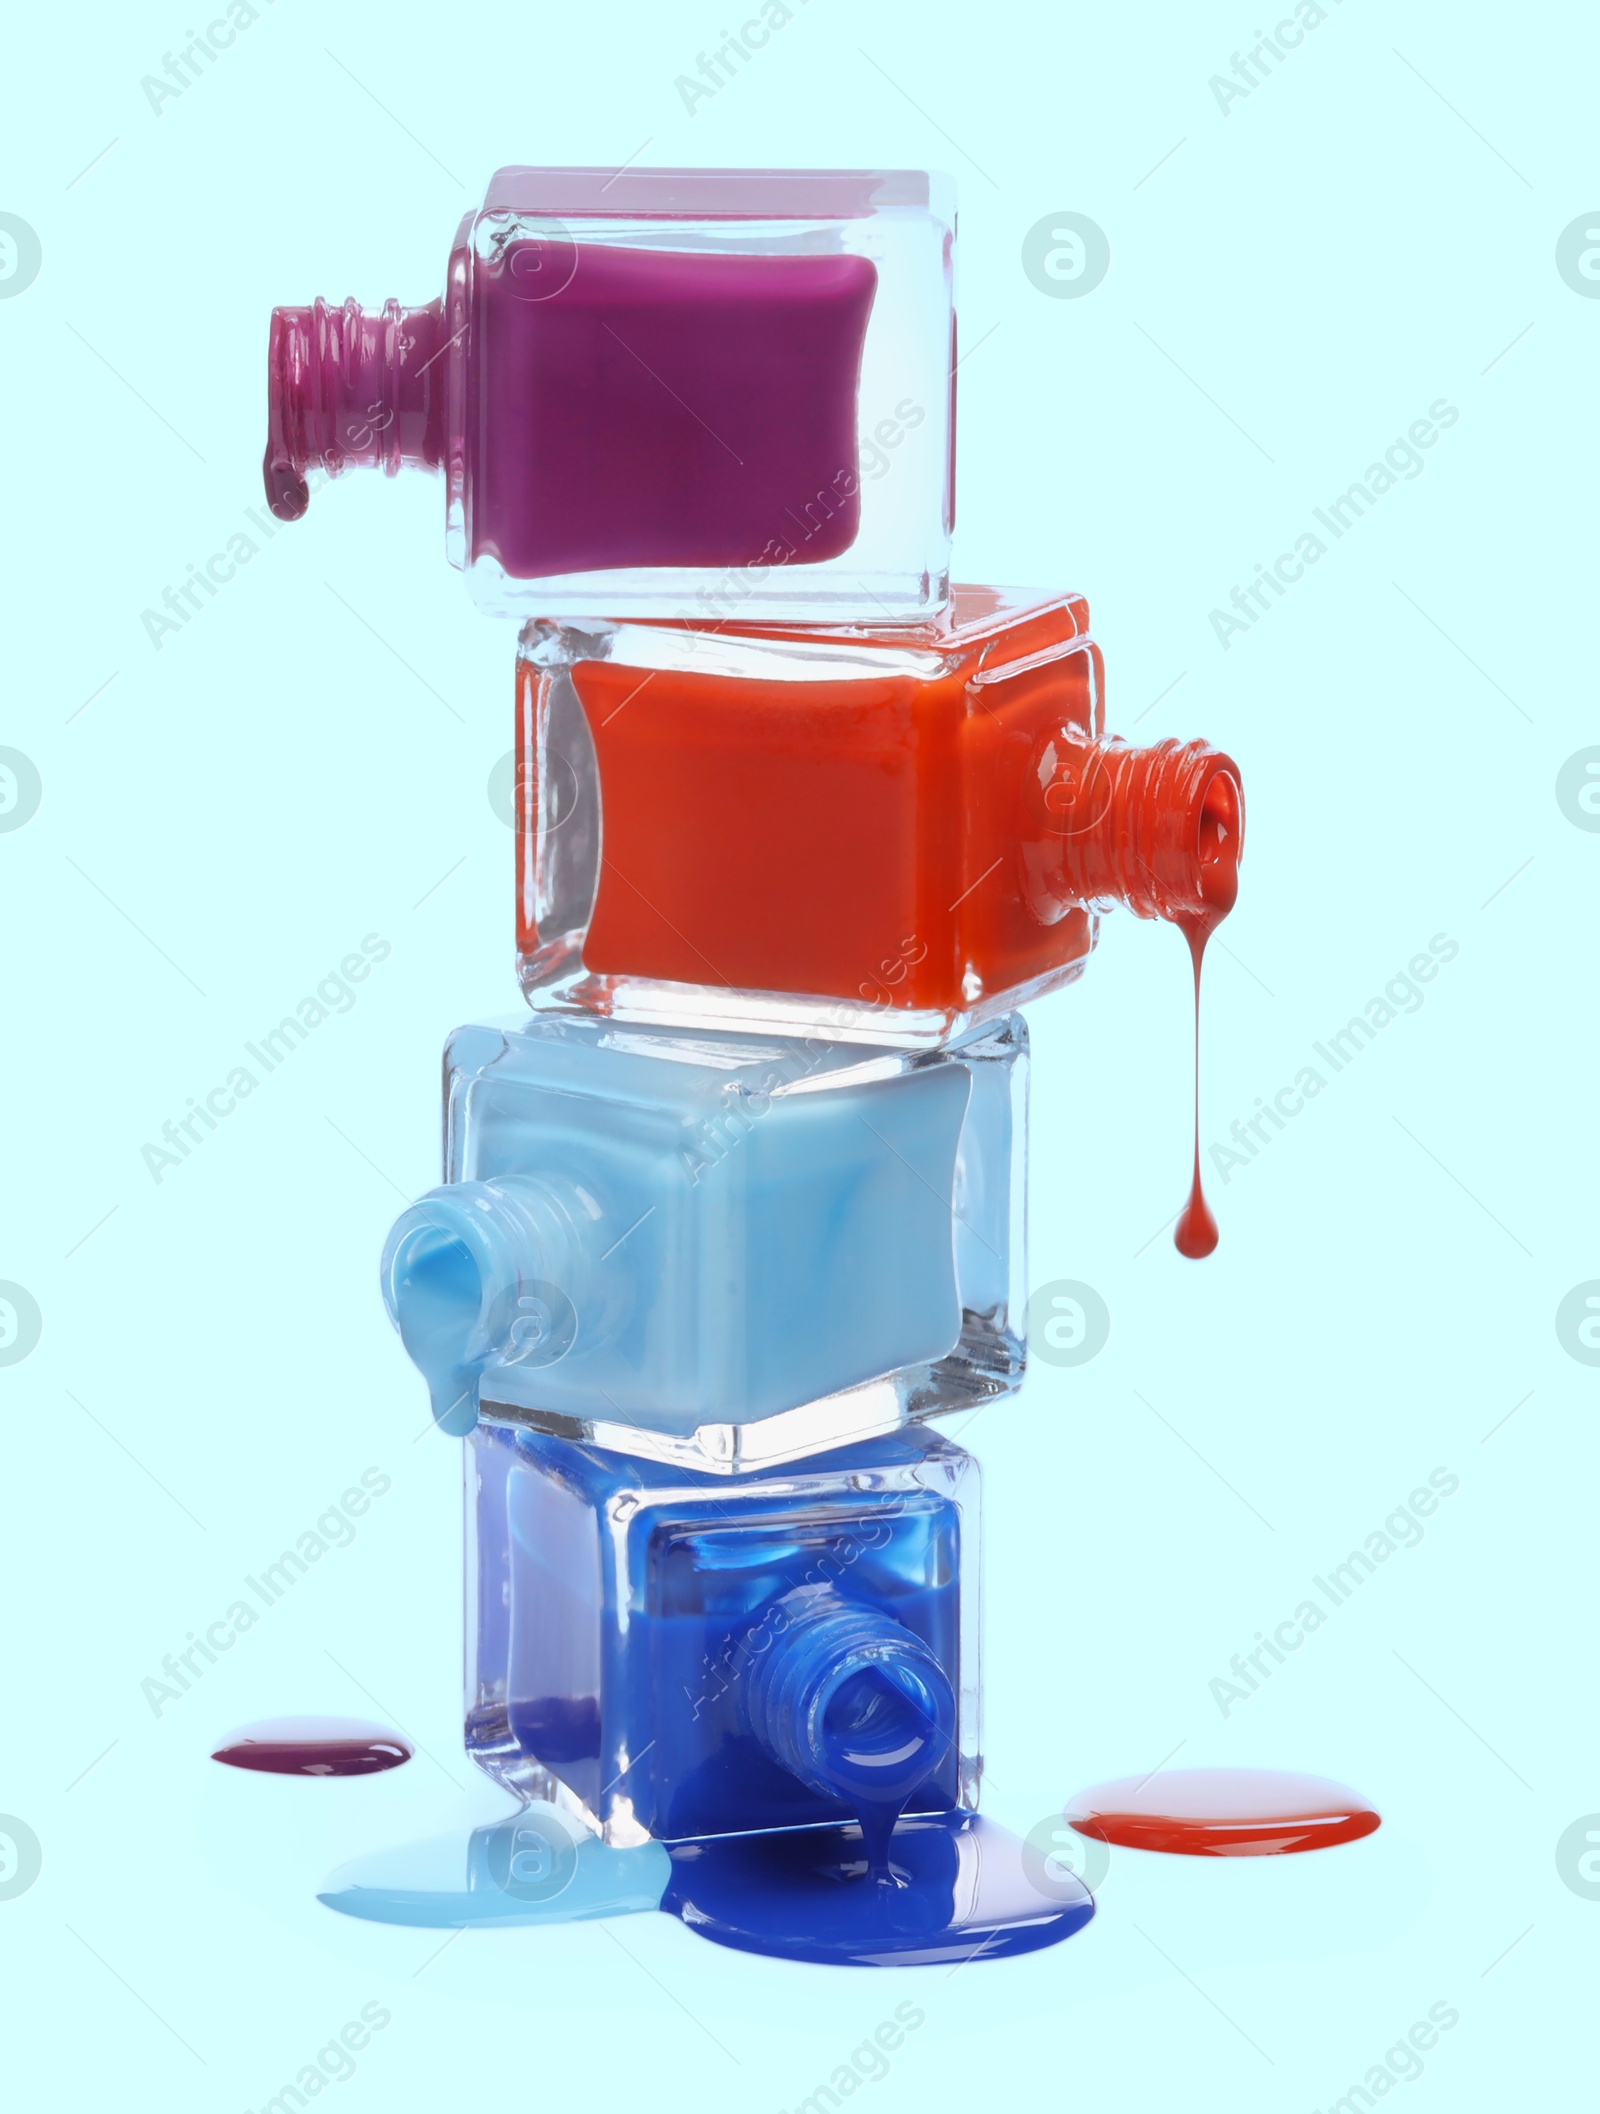 Image of Different nail polishes dripping from open bottles on light blue background